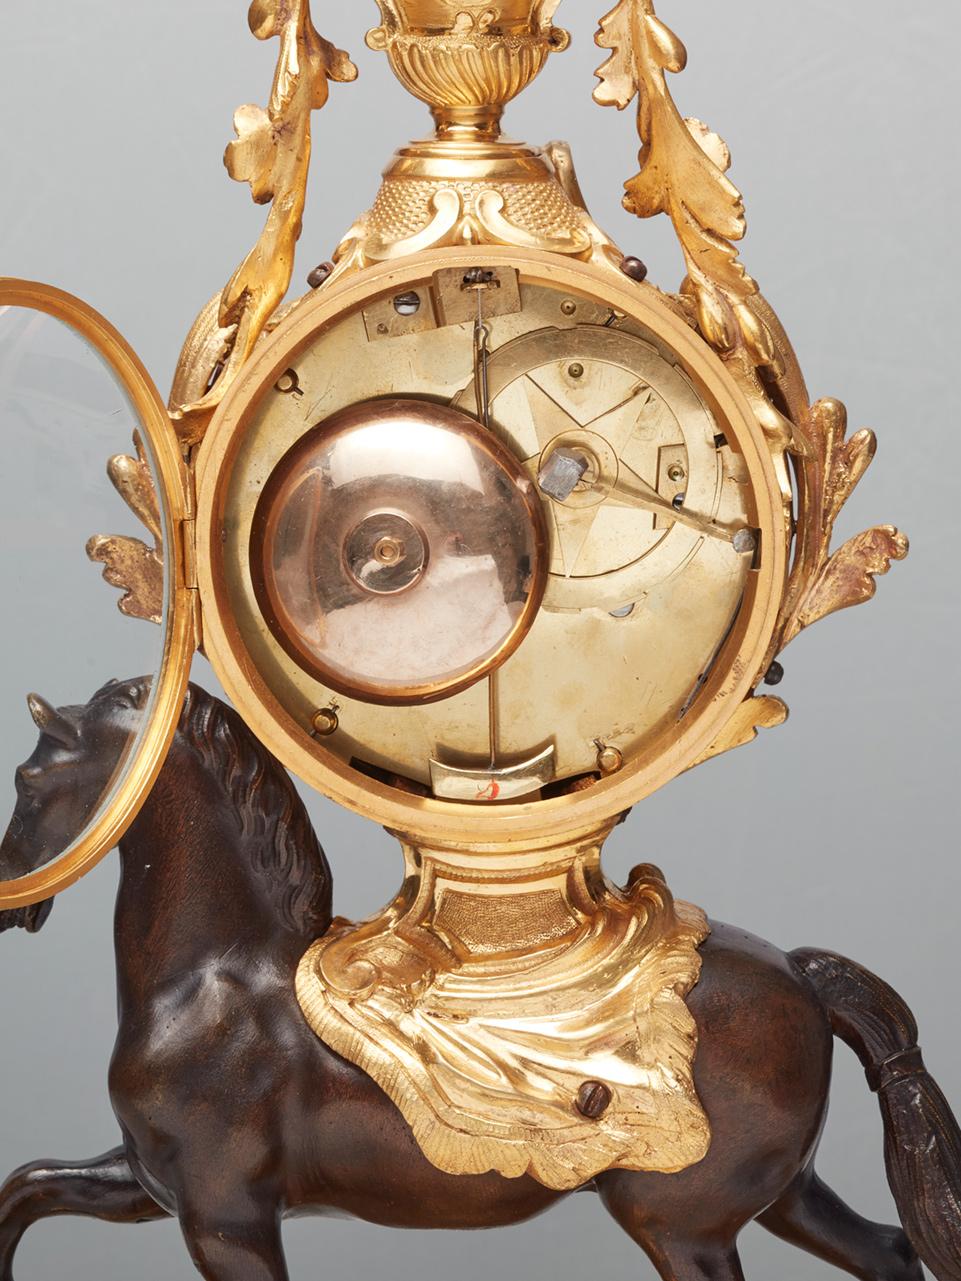 Bronze French 'Transition' mantel clock by Montjoye Fils a Paris  For Sale